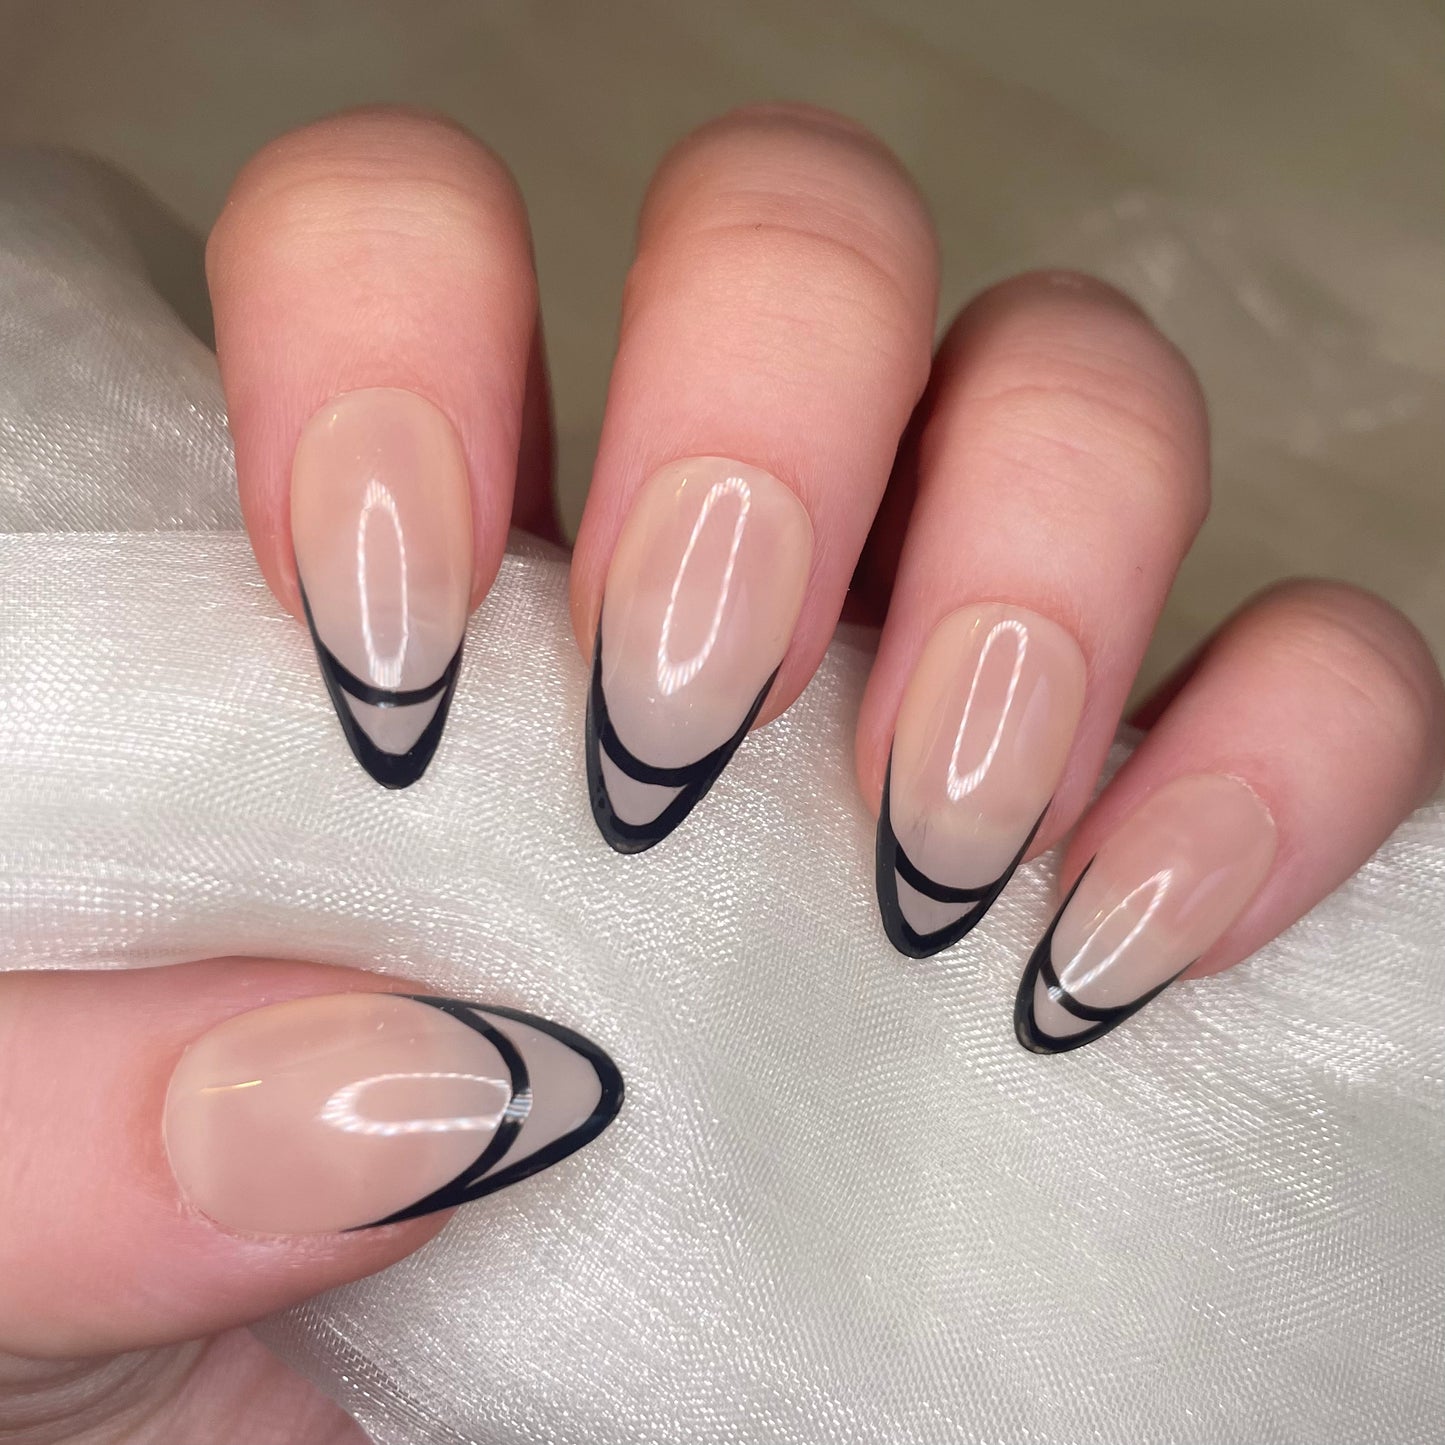 Sheer Nude Almond Nails With Black Fine Line Detail